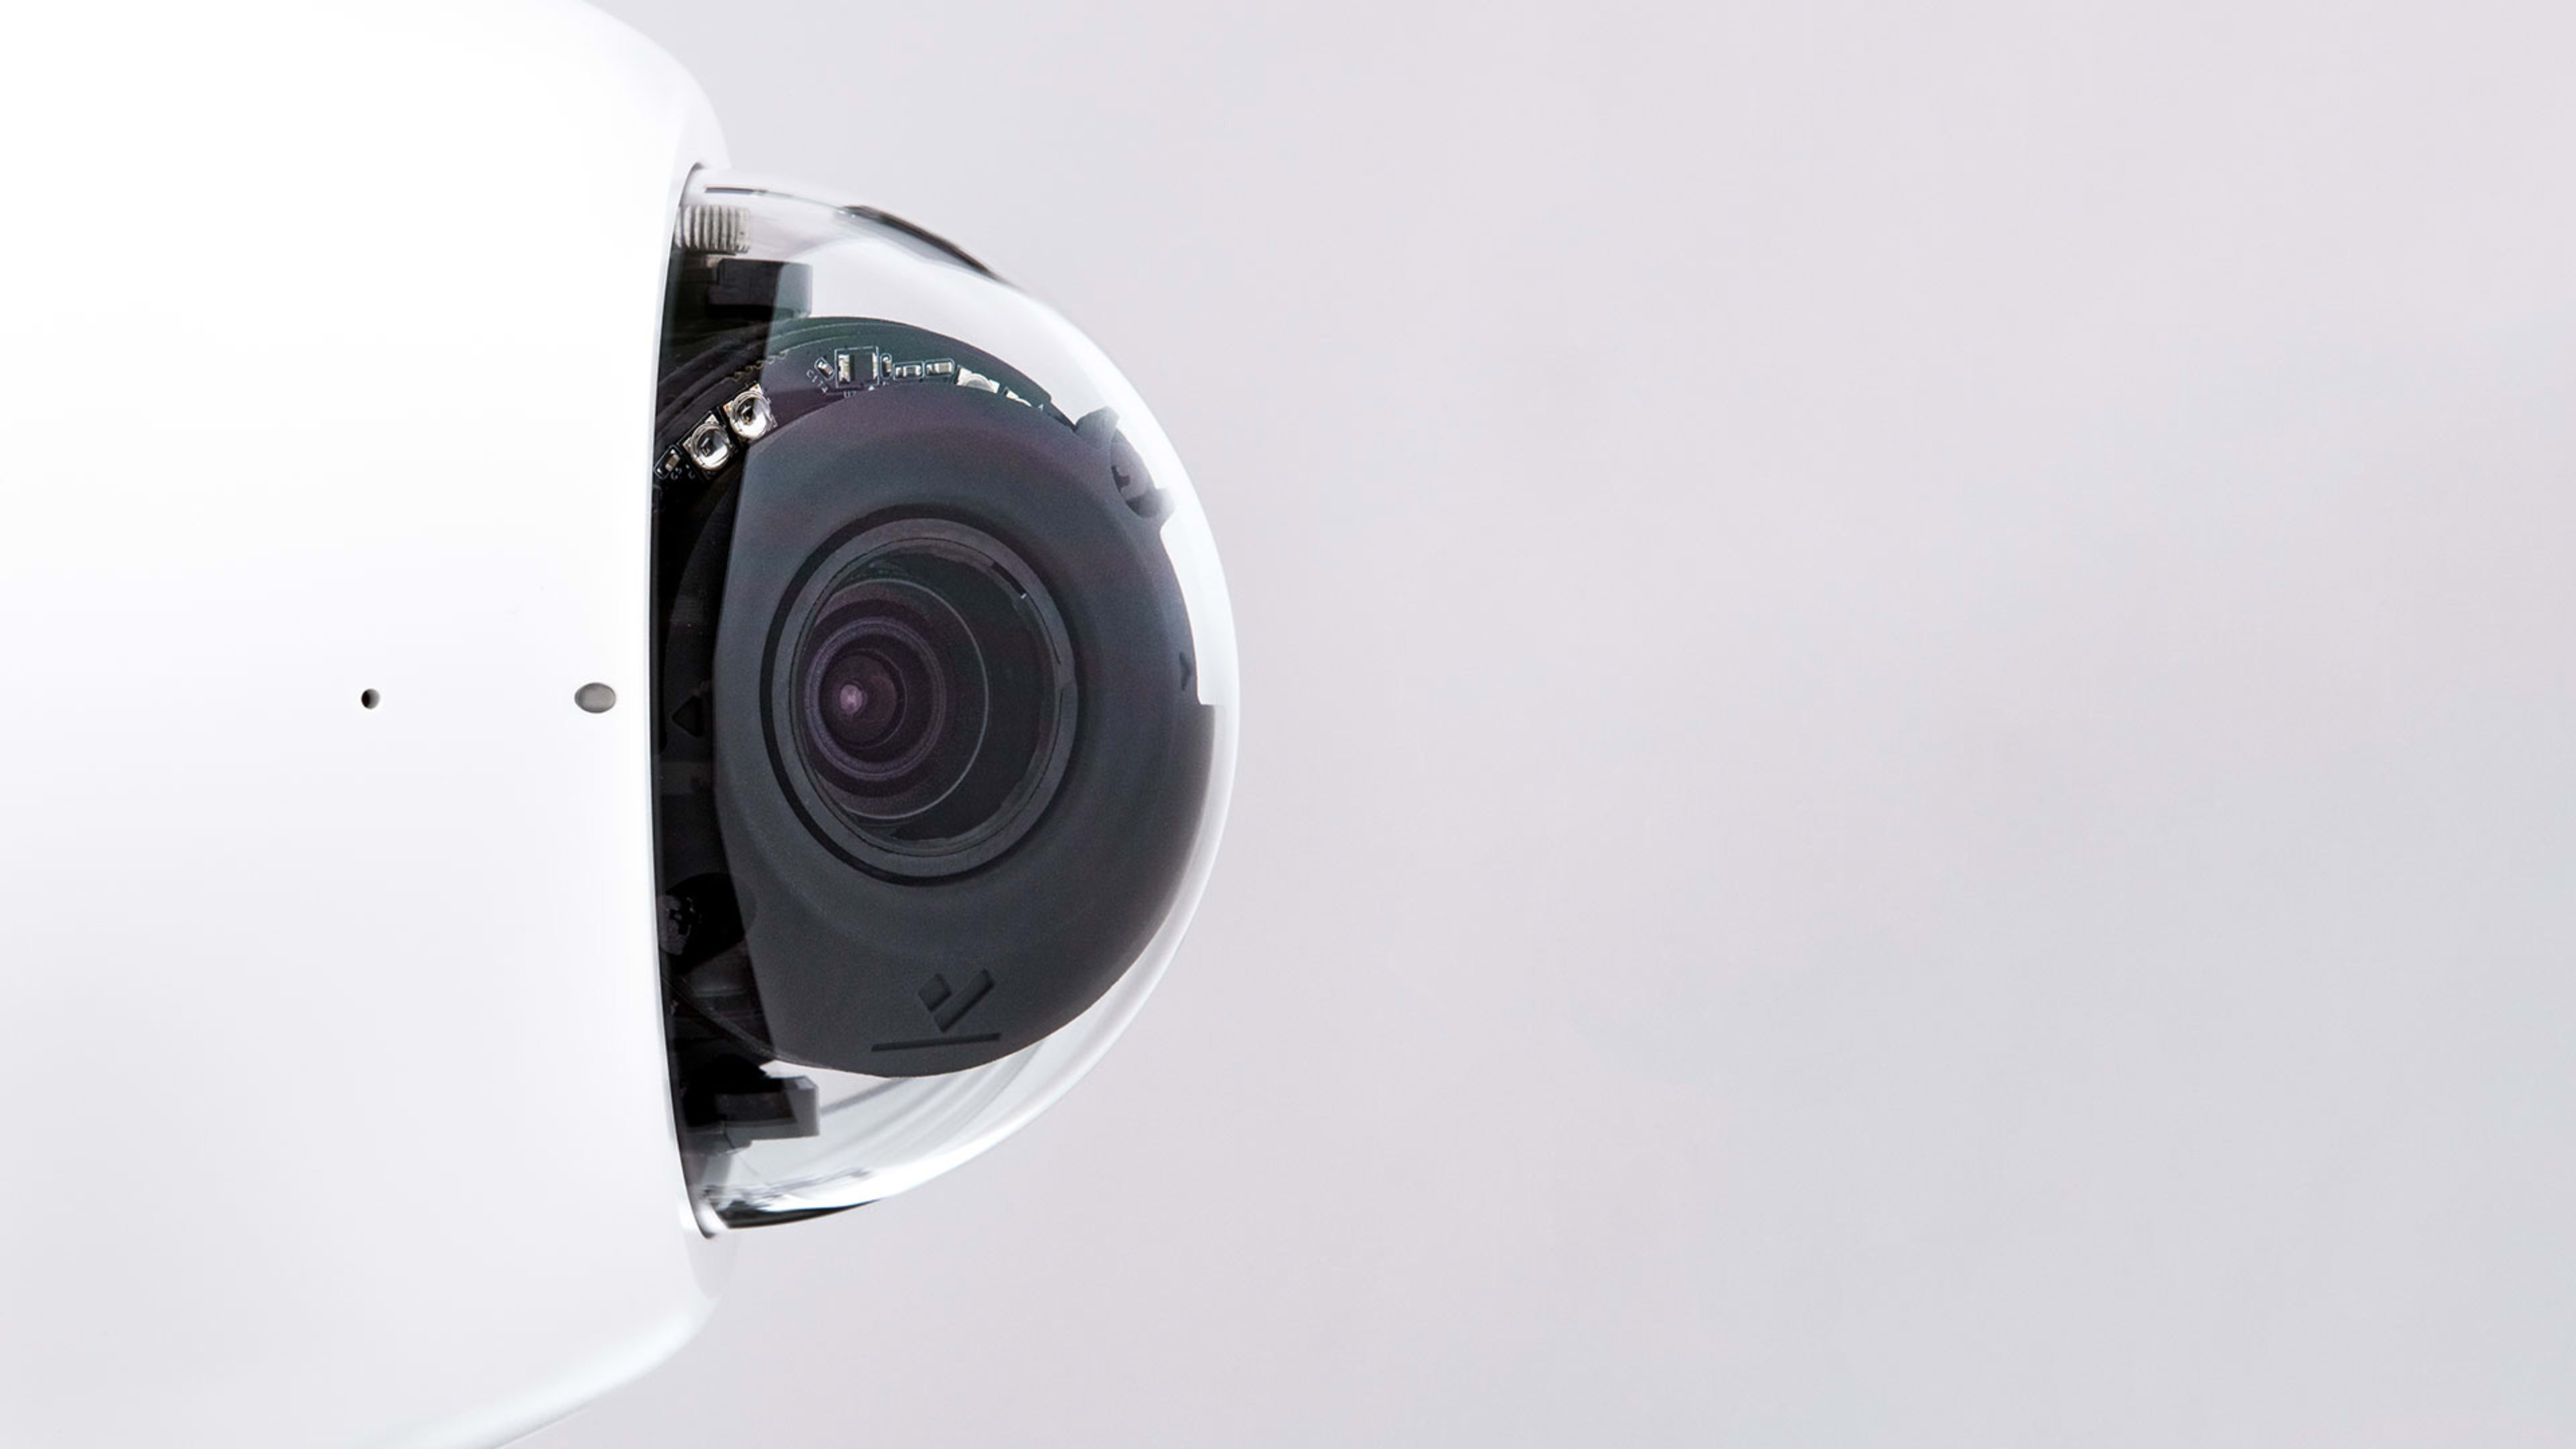 Security Cameras Have A Security Problem. This Startup Thinks It Has A Solution.